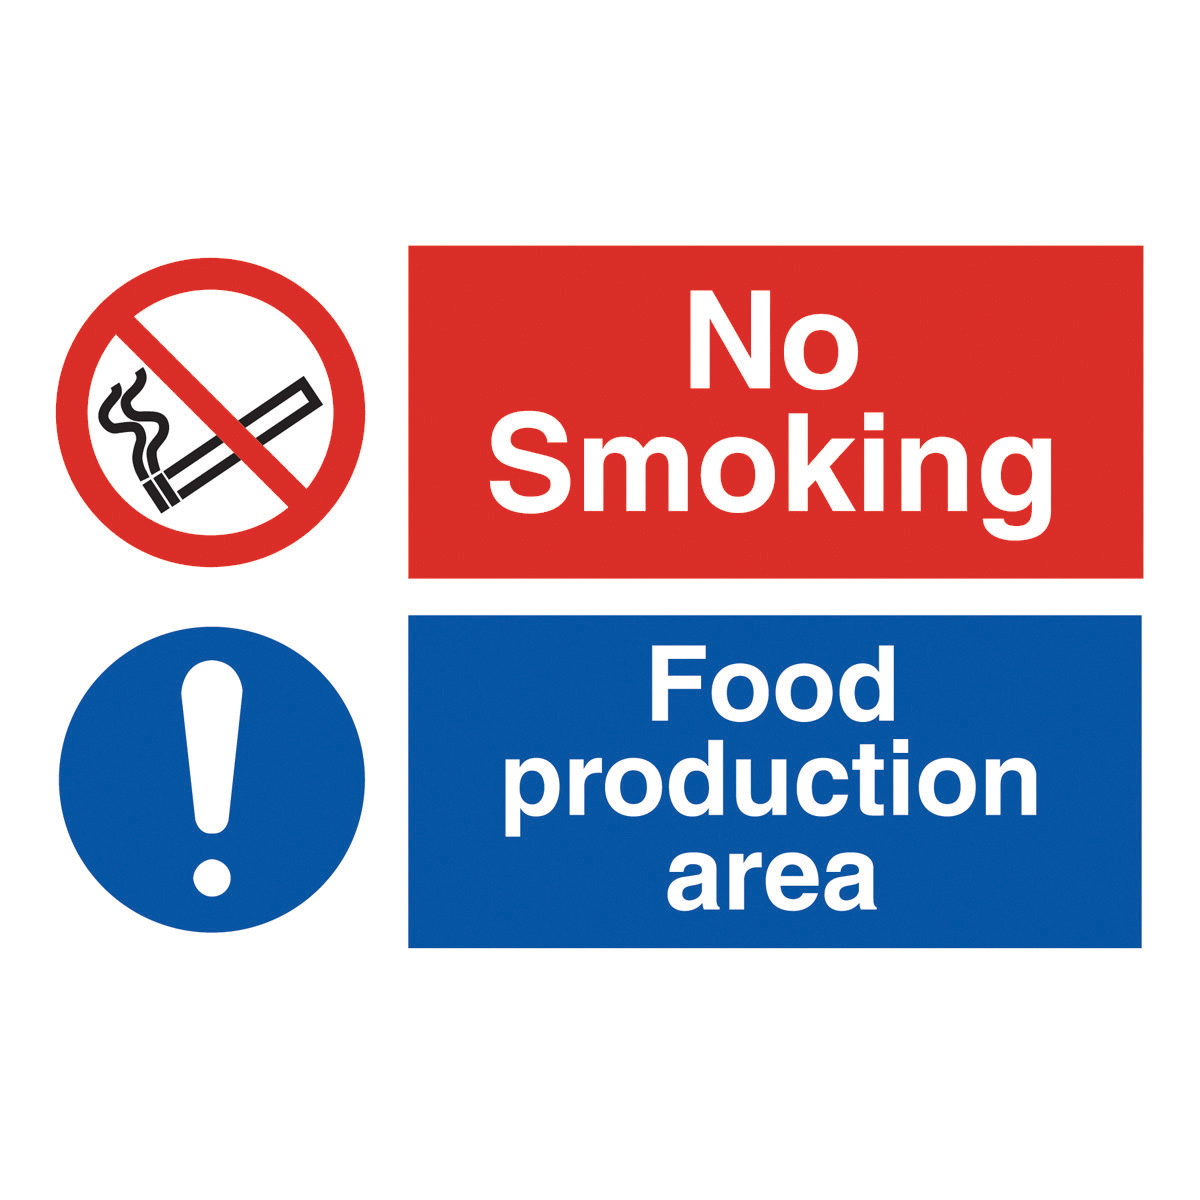 No Smoking Food Preparation Area Safety Sign - Hygiene Sign from 